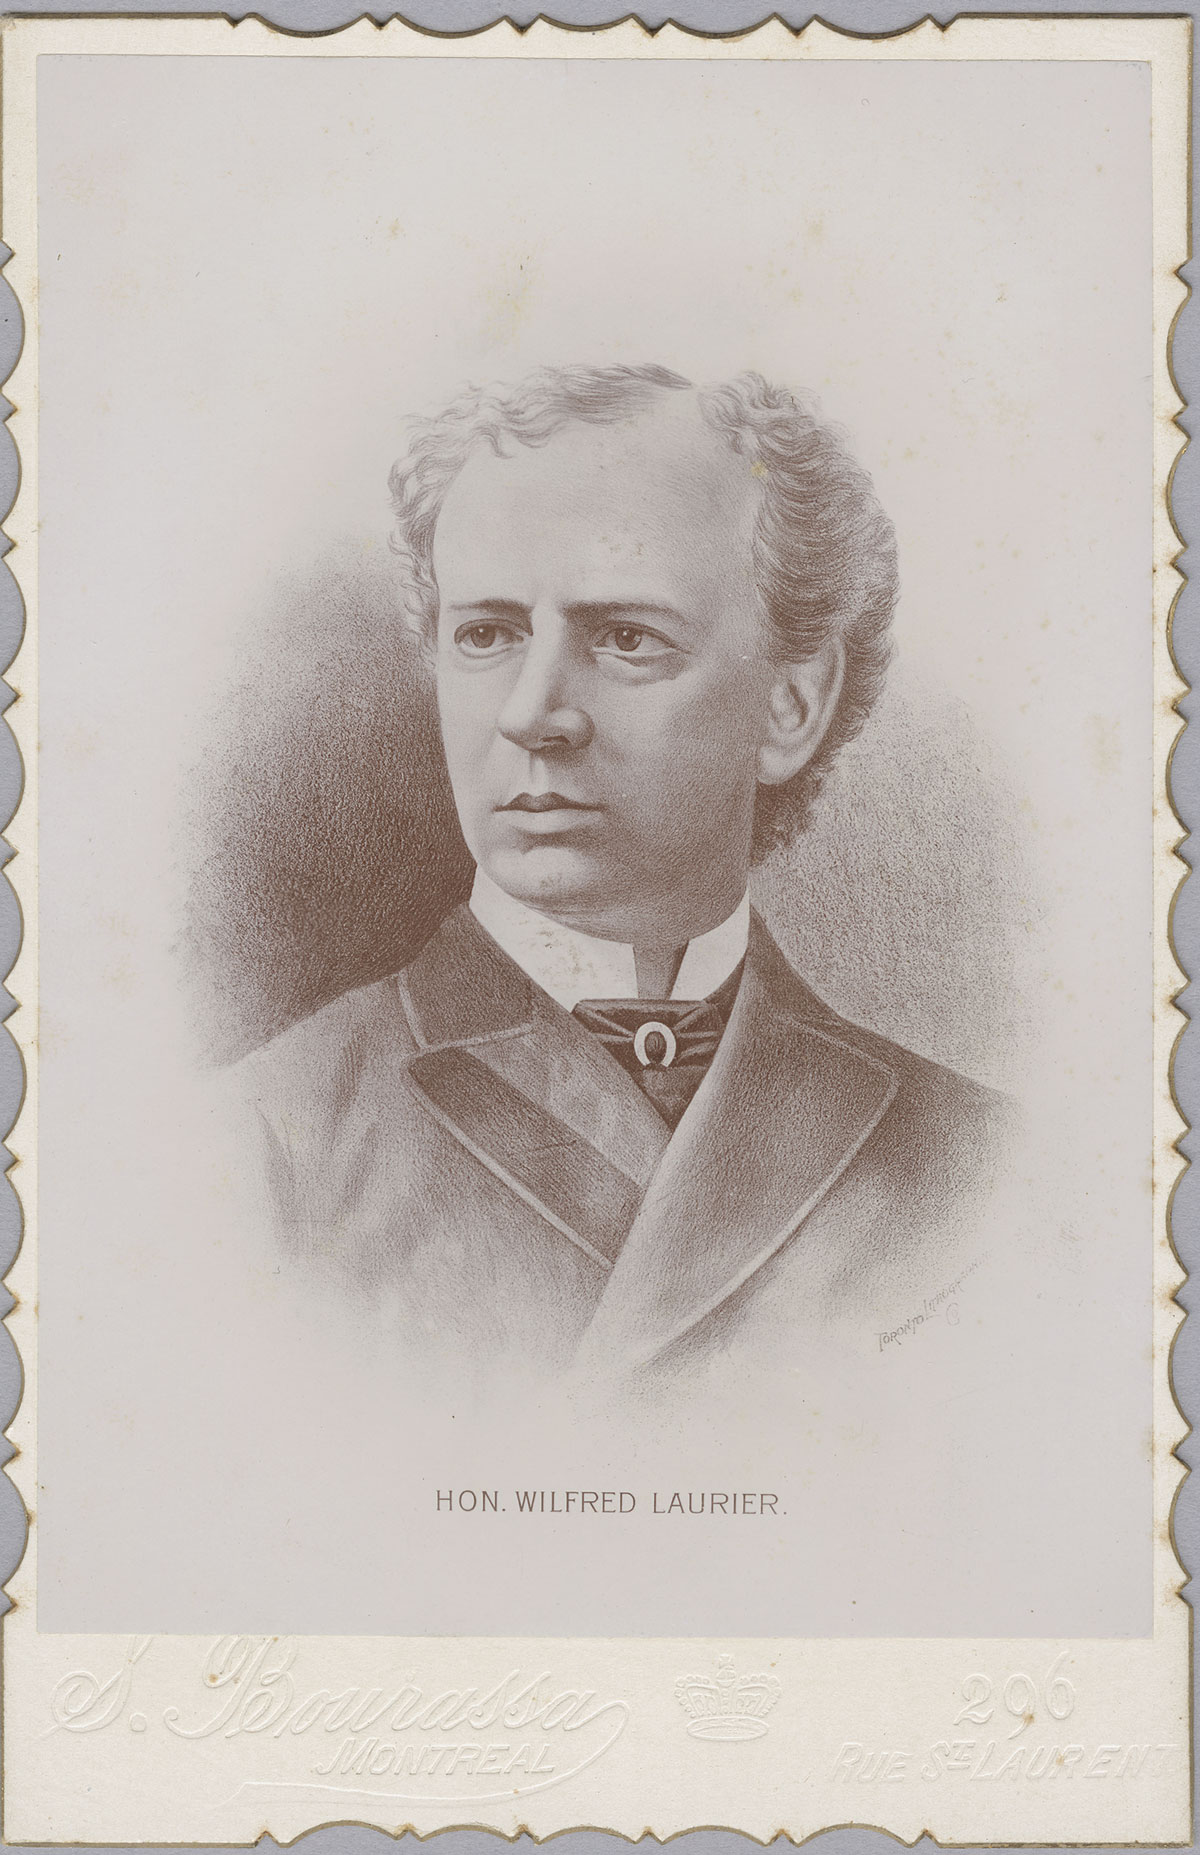 Photograph of Laurier taken around 1885, shortly before he became Leader of the Liberal Party of Canada. Canadian Museum of History, 2012-H0040.93. Gift of Serge Joyal.